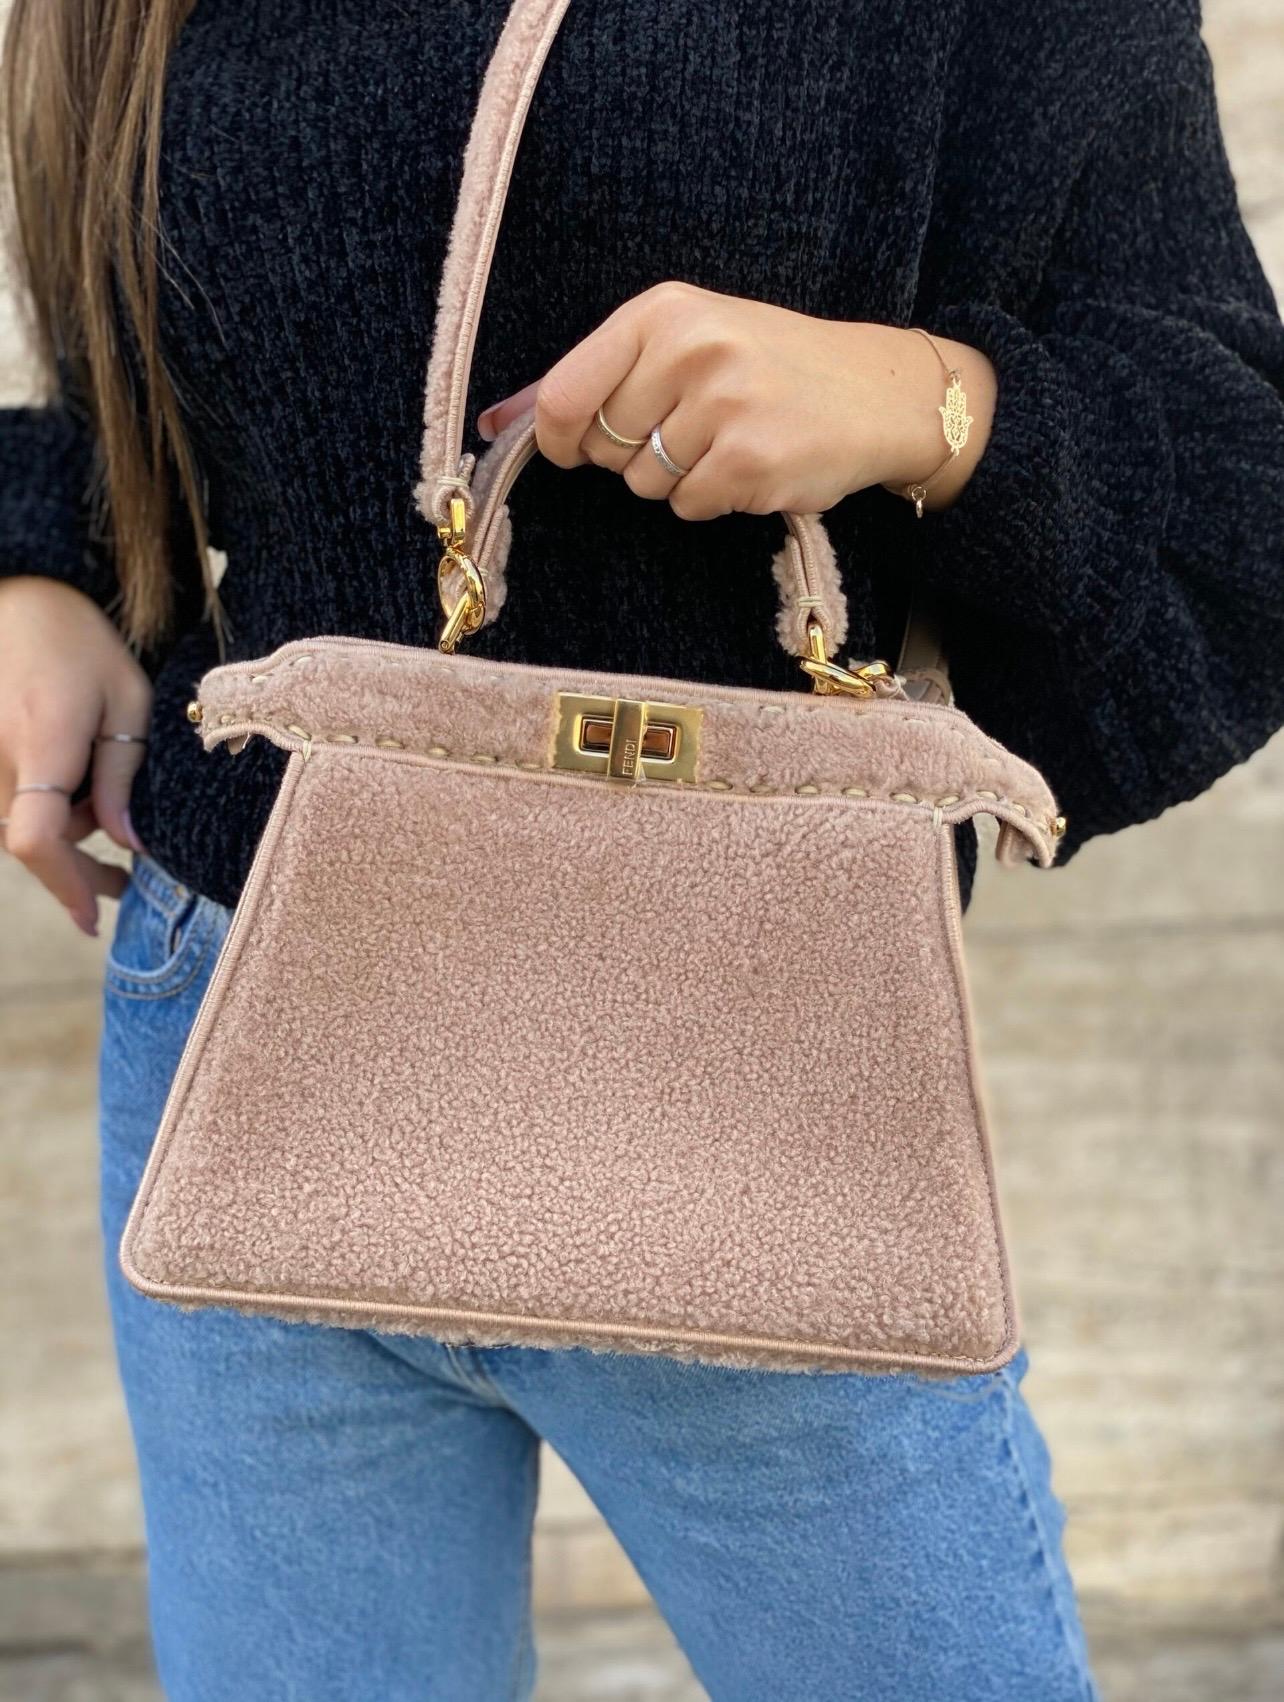 Fendi Peekaboo Small edition bag made of soft beige merino sheepskin and golden hardware.The bag features two side openings with the iconic Fendi swivel closure. The interior is divided into two different compartments, both of which are lined with a